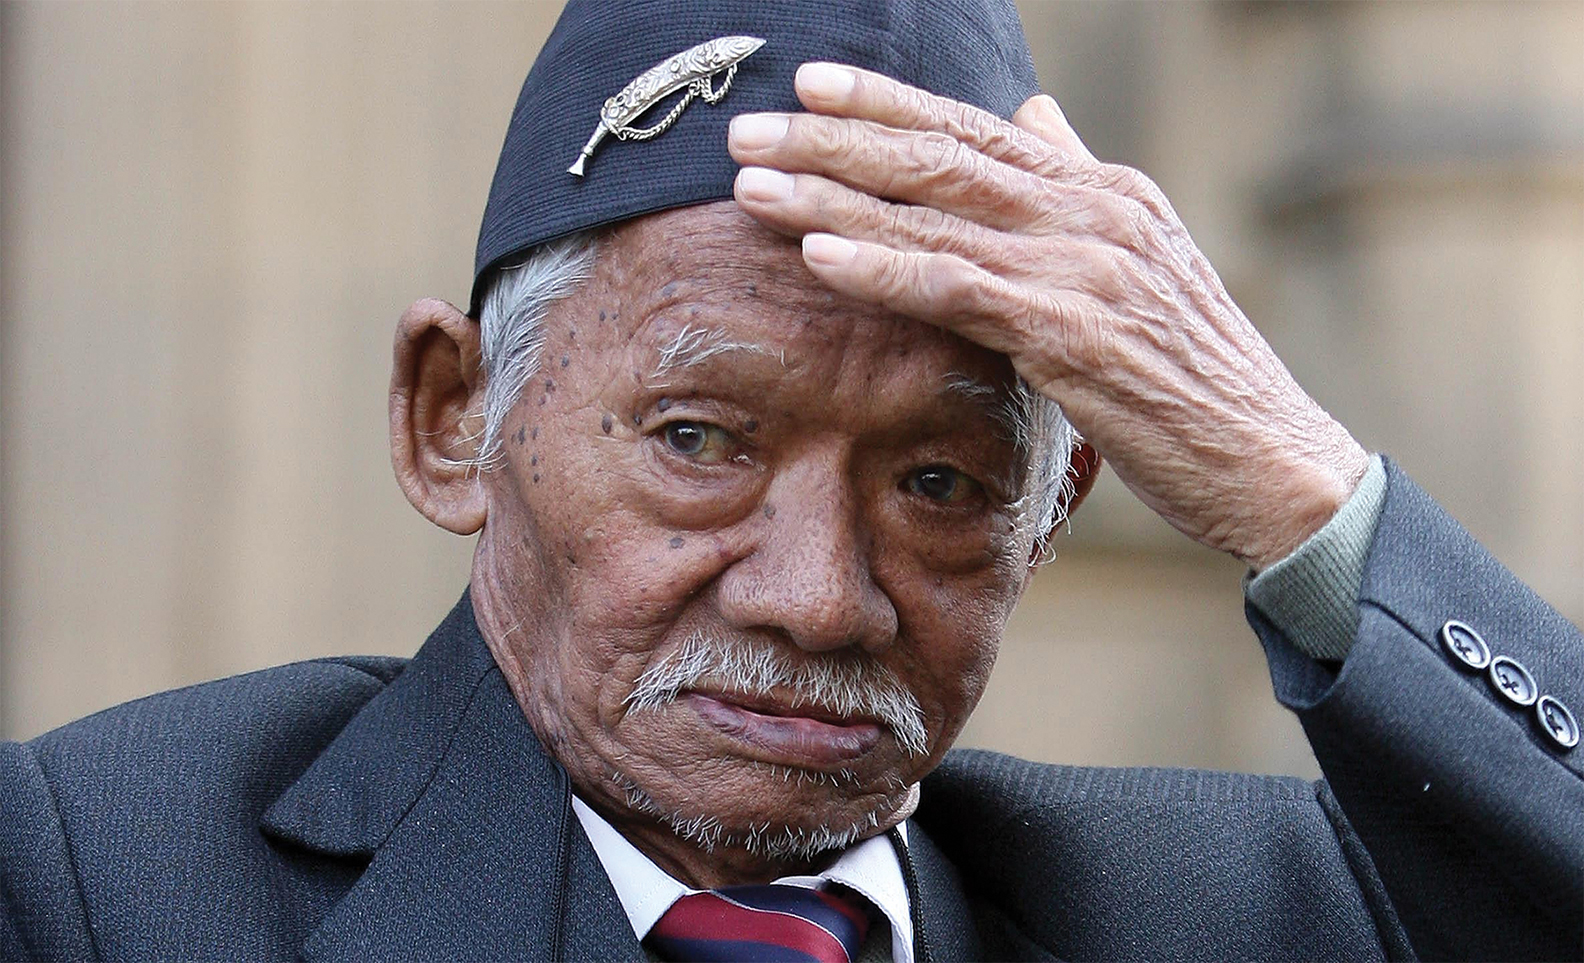 This Gurkha Lost His Hand and Eye Fighting off More Than 200 Japanese in Burma